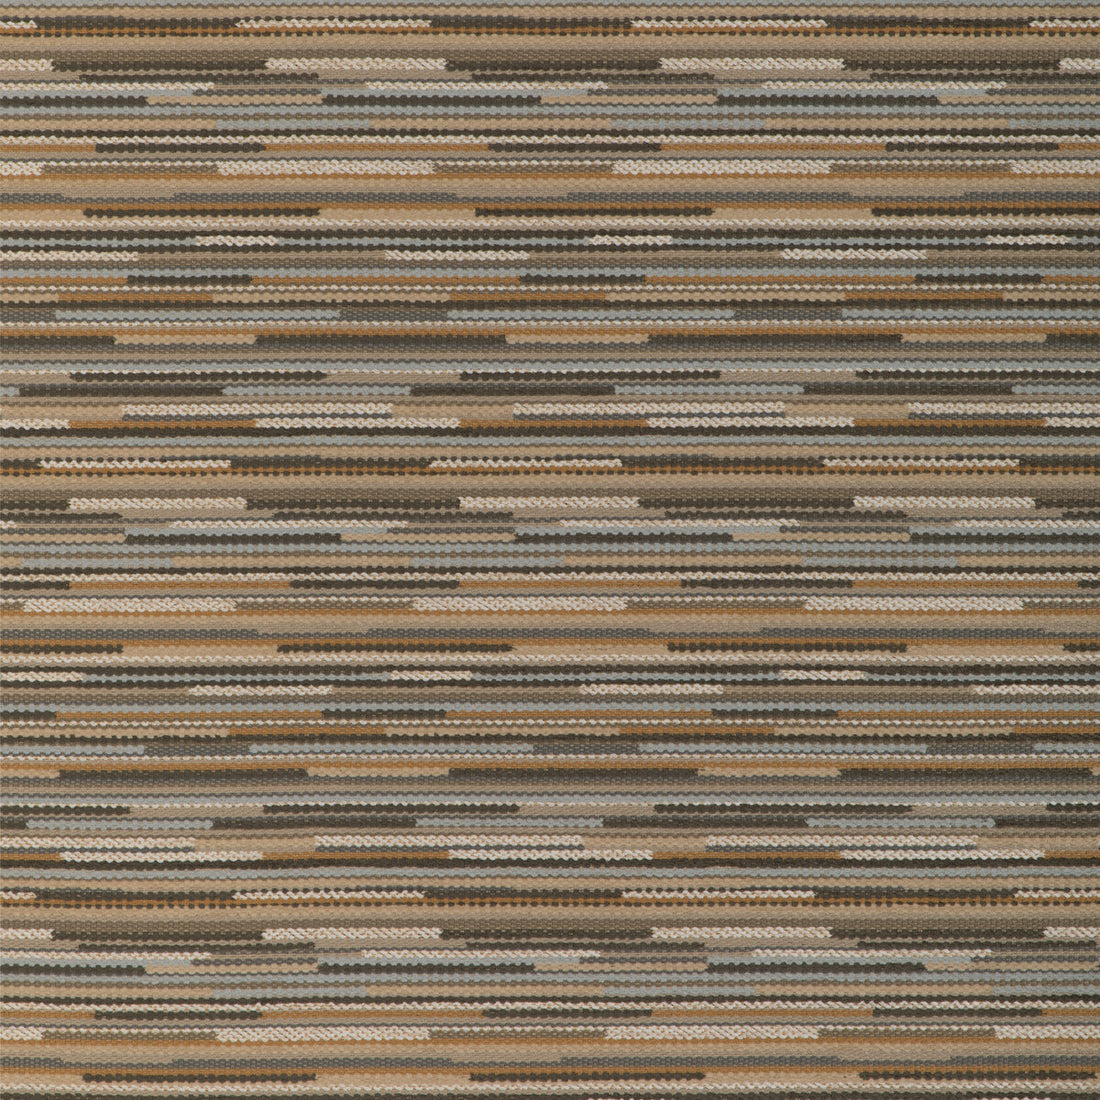 Watershed fabric in driftwood color - pattern 37070.6106.0 - by Kravet Contract in the Chesapeake collection